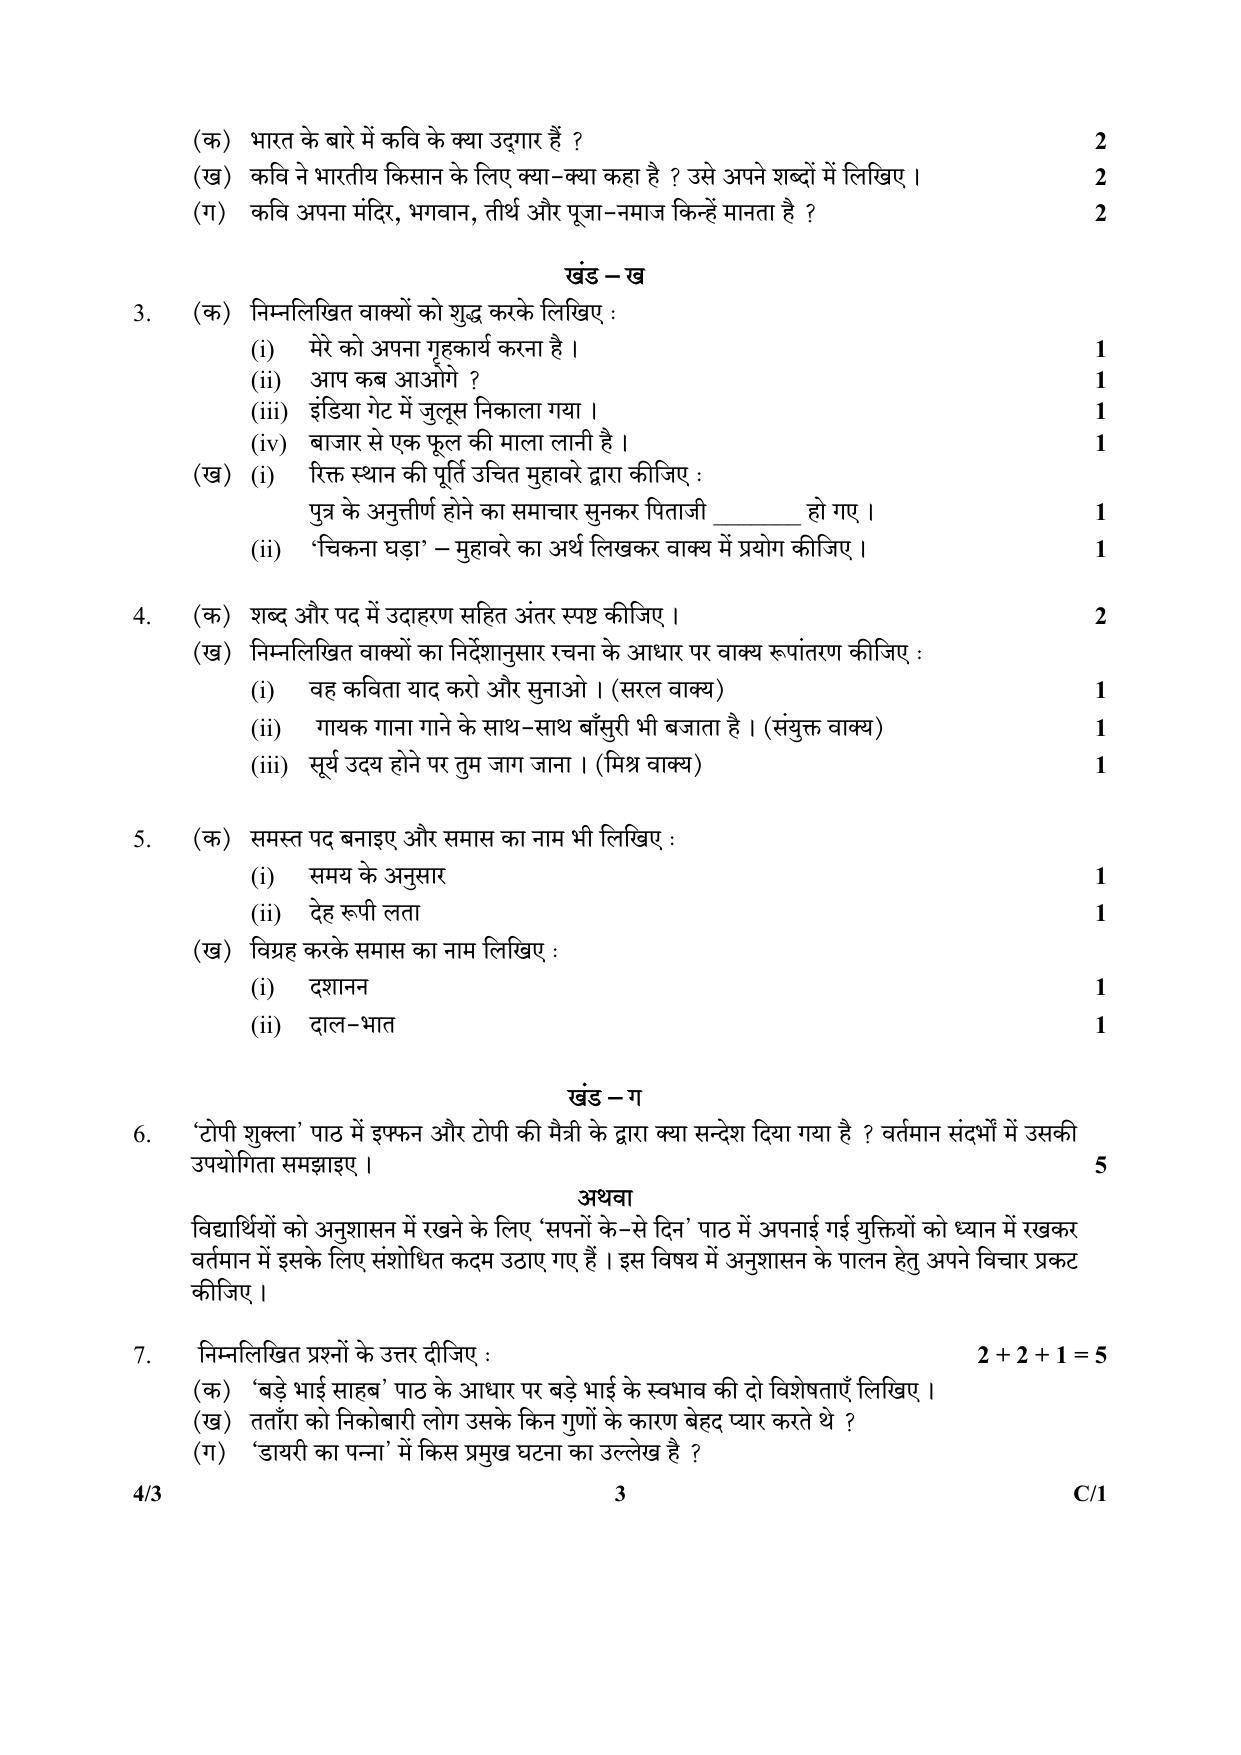 CBSE Class 10 4-3_Hindi 2018 Compartment Question Paper - Page 3